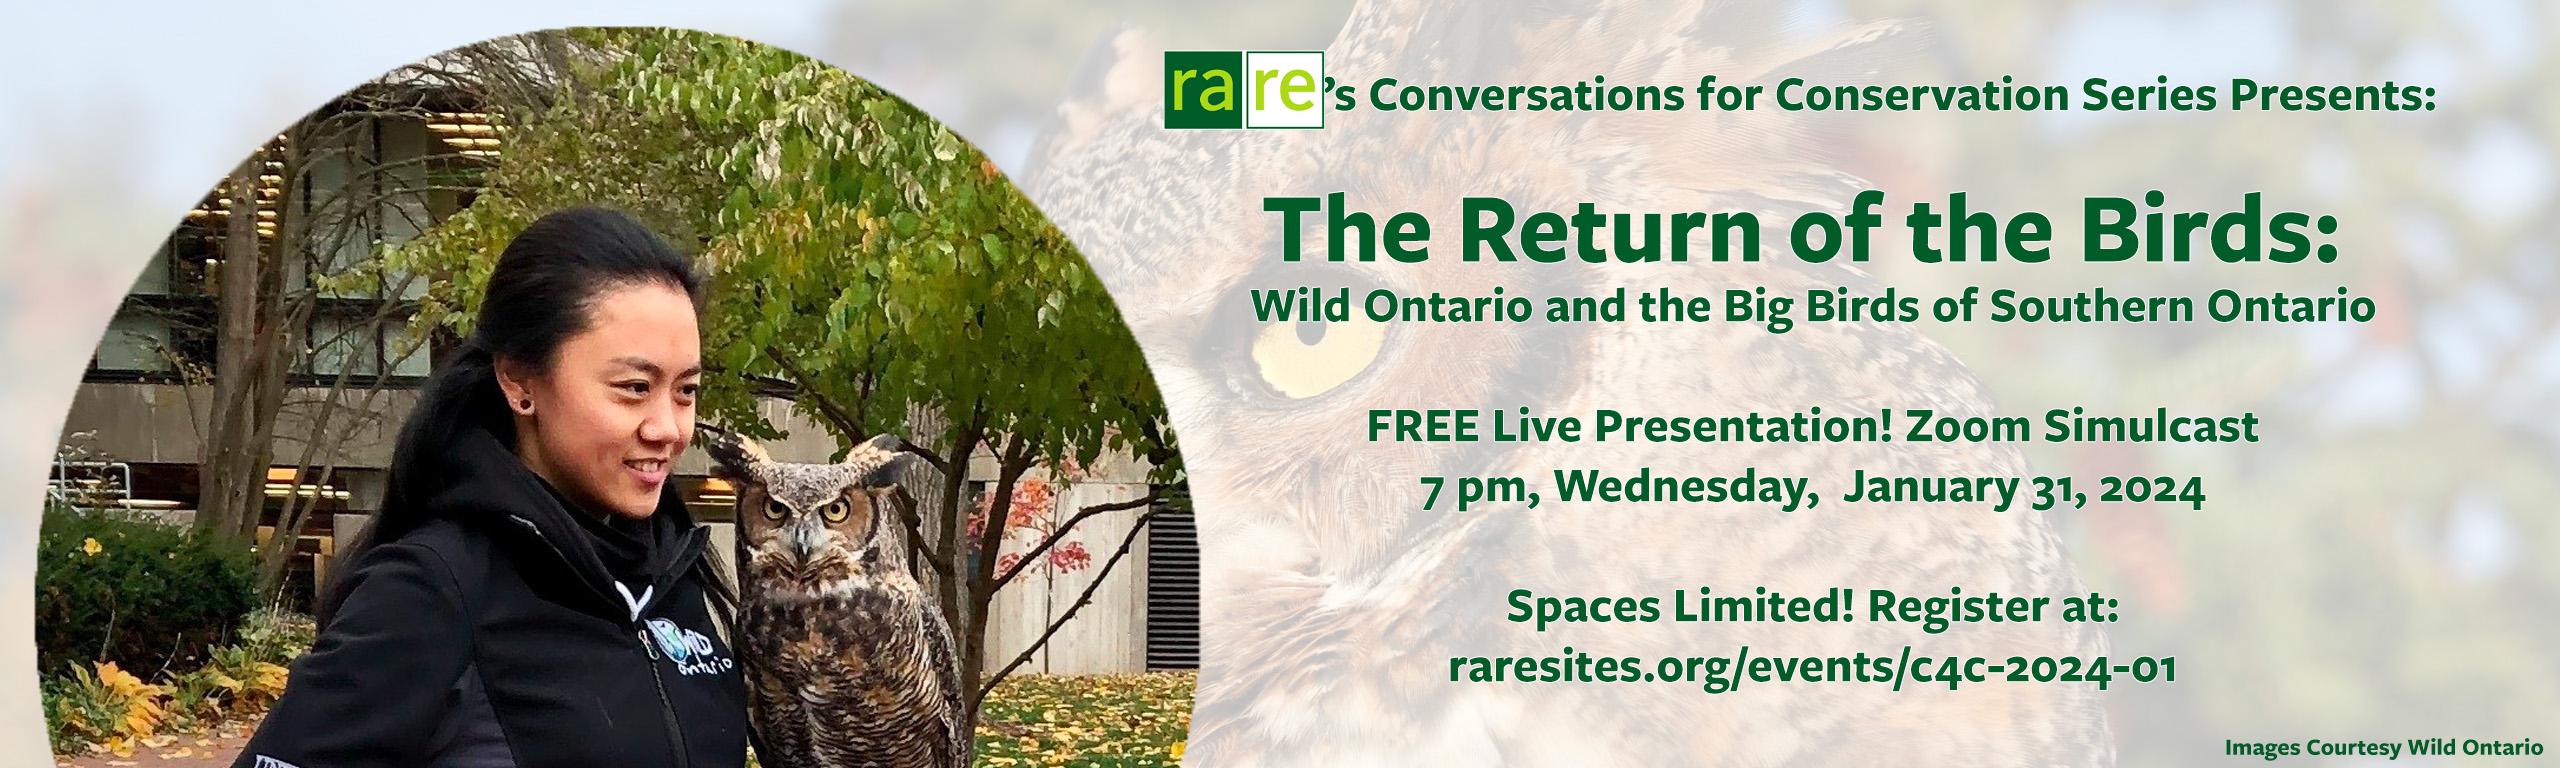 Conversations for Conservation: The Return of the Birds, January 31, 2024